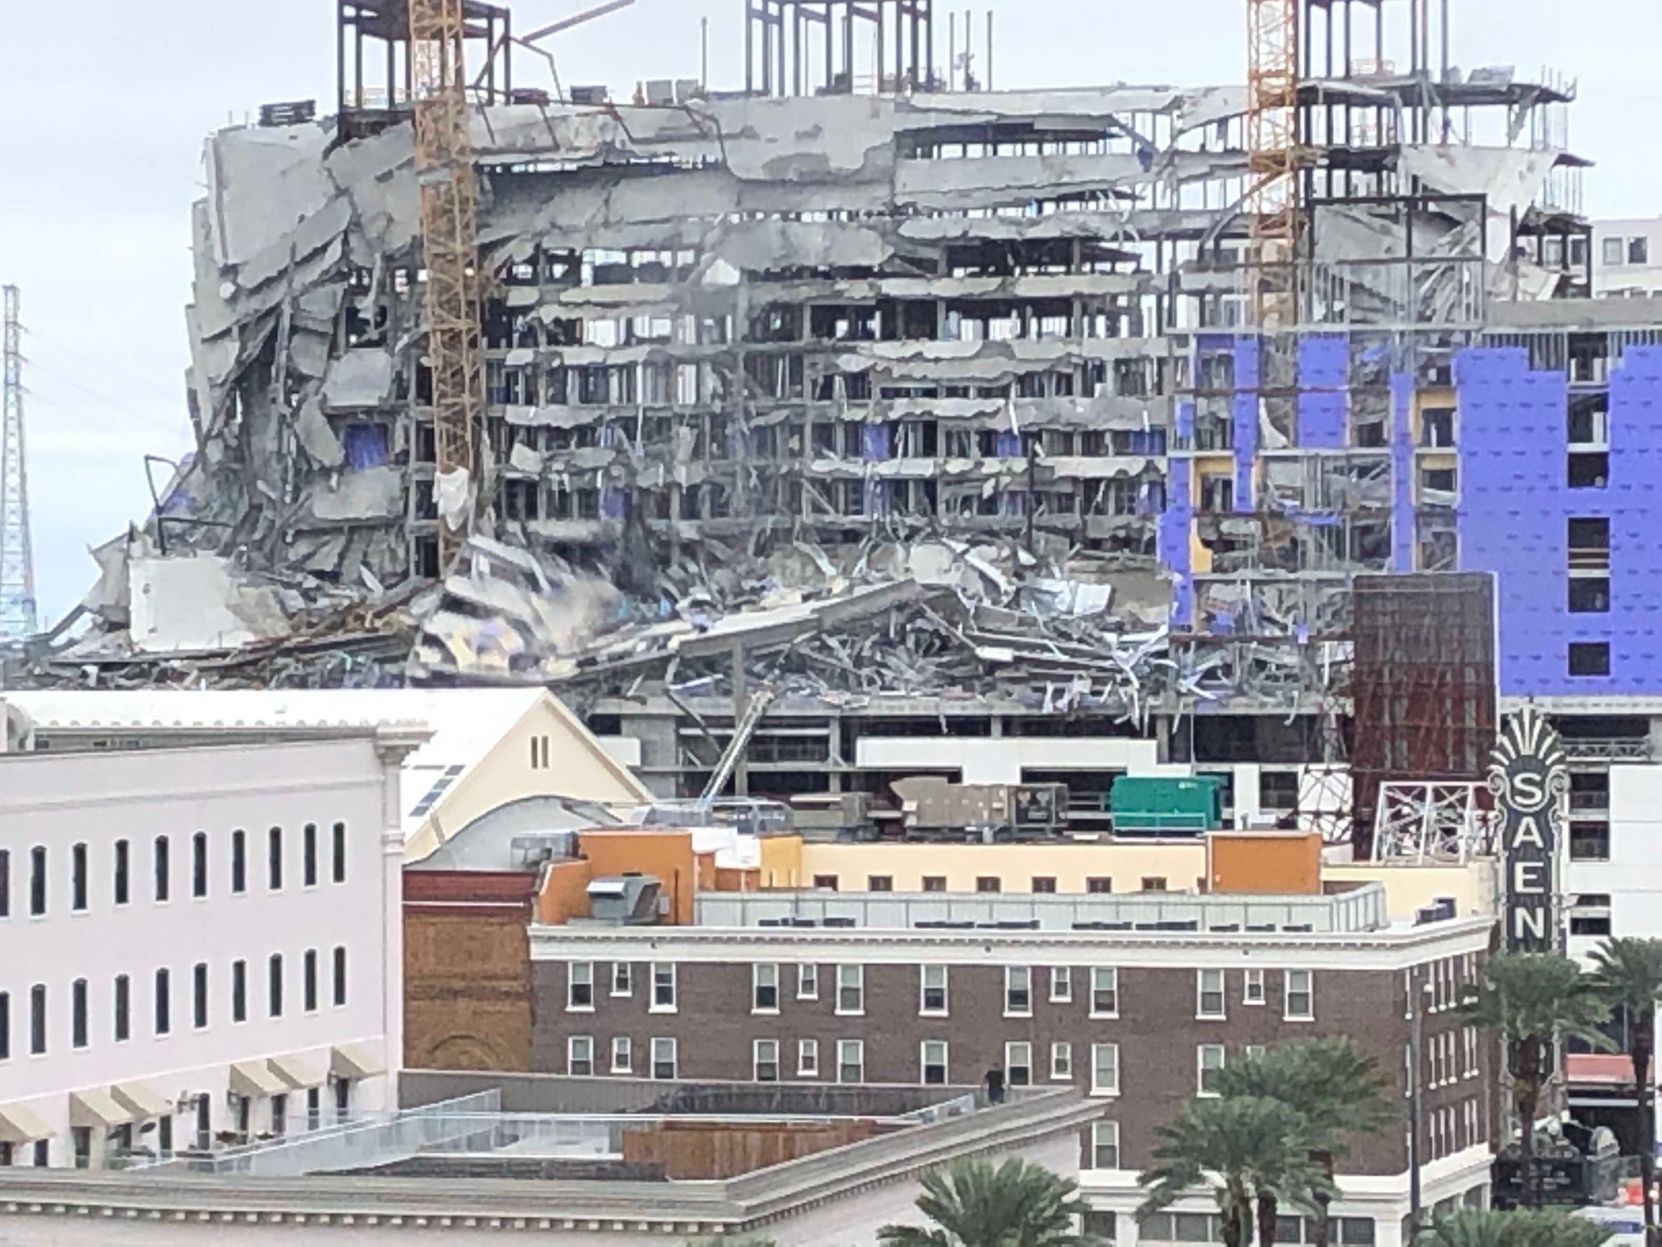 hard rock casino new orleans collapse